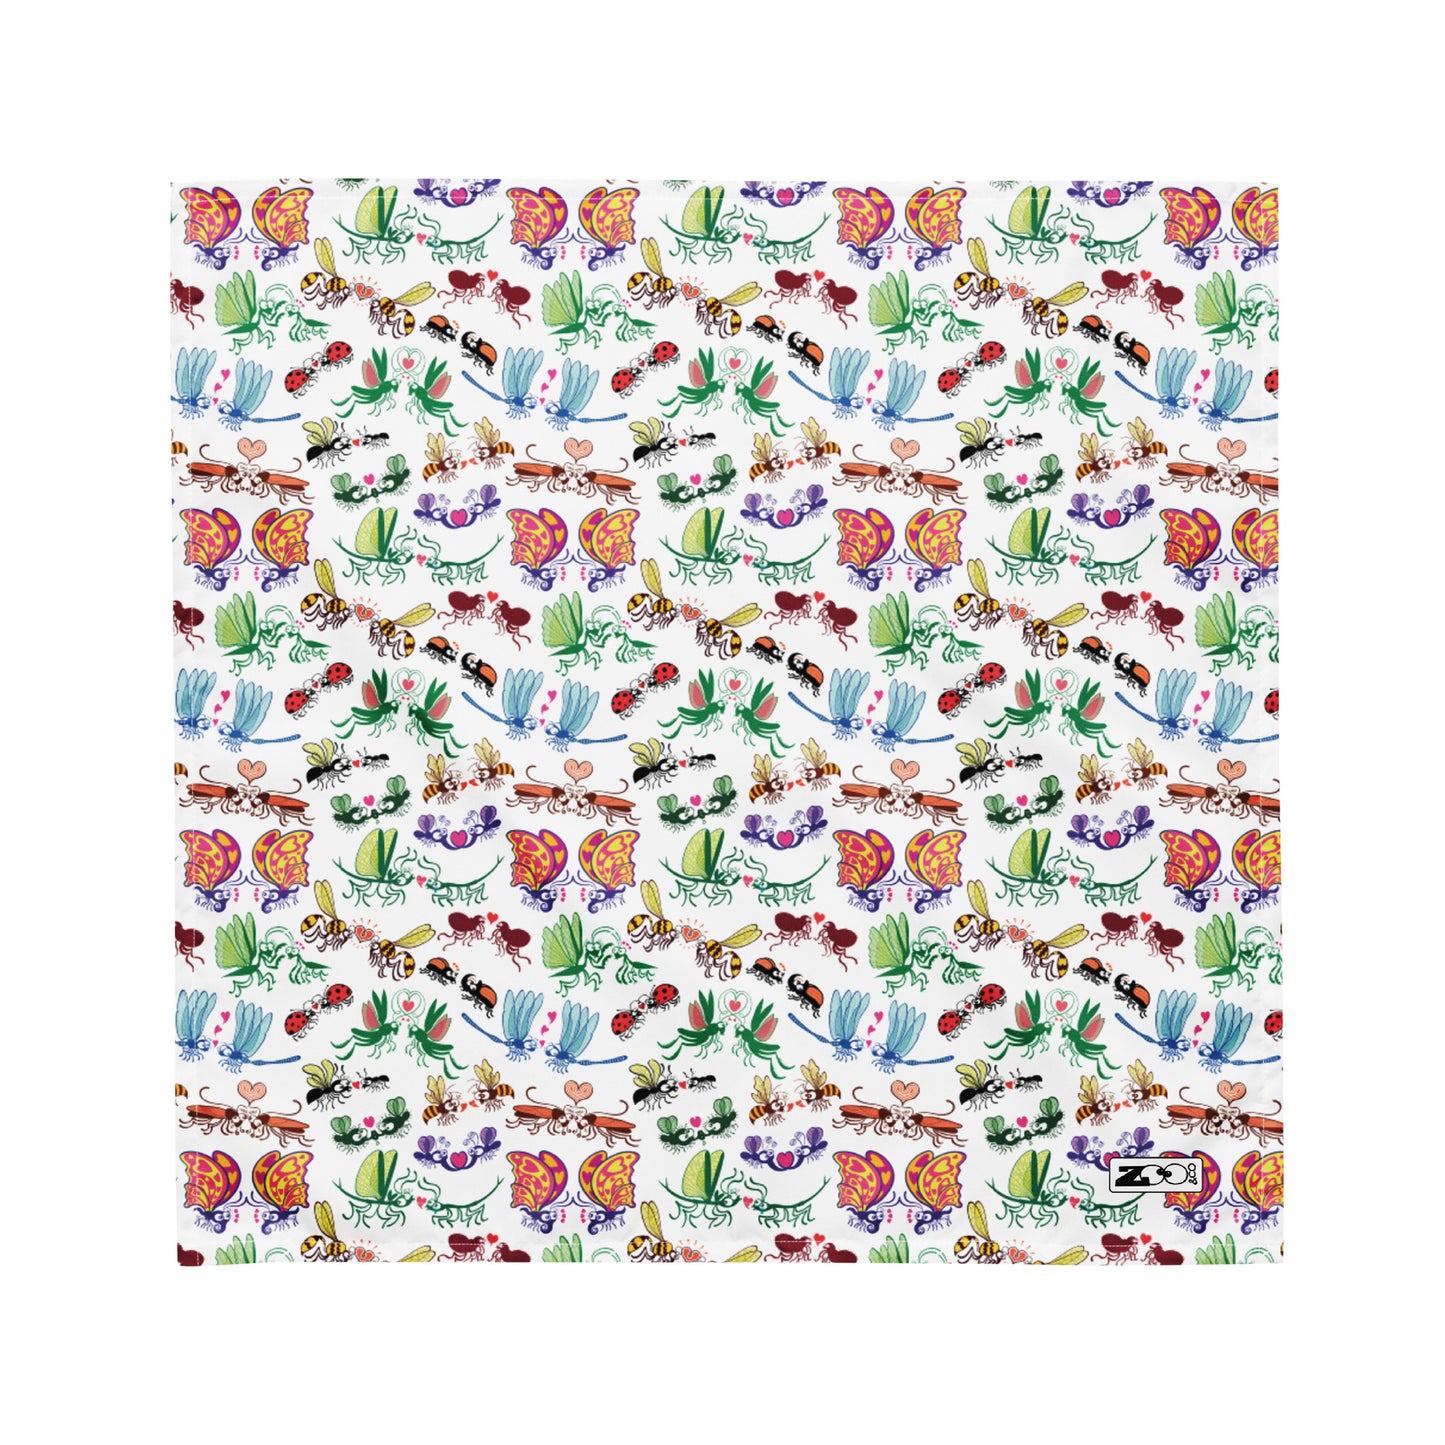 Cool insects madly in love All-over print bandana. Medium size